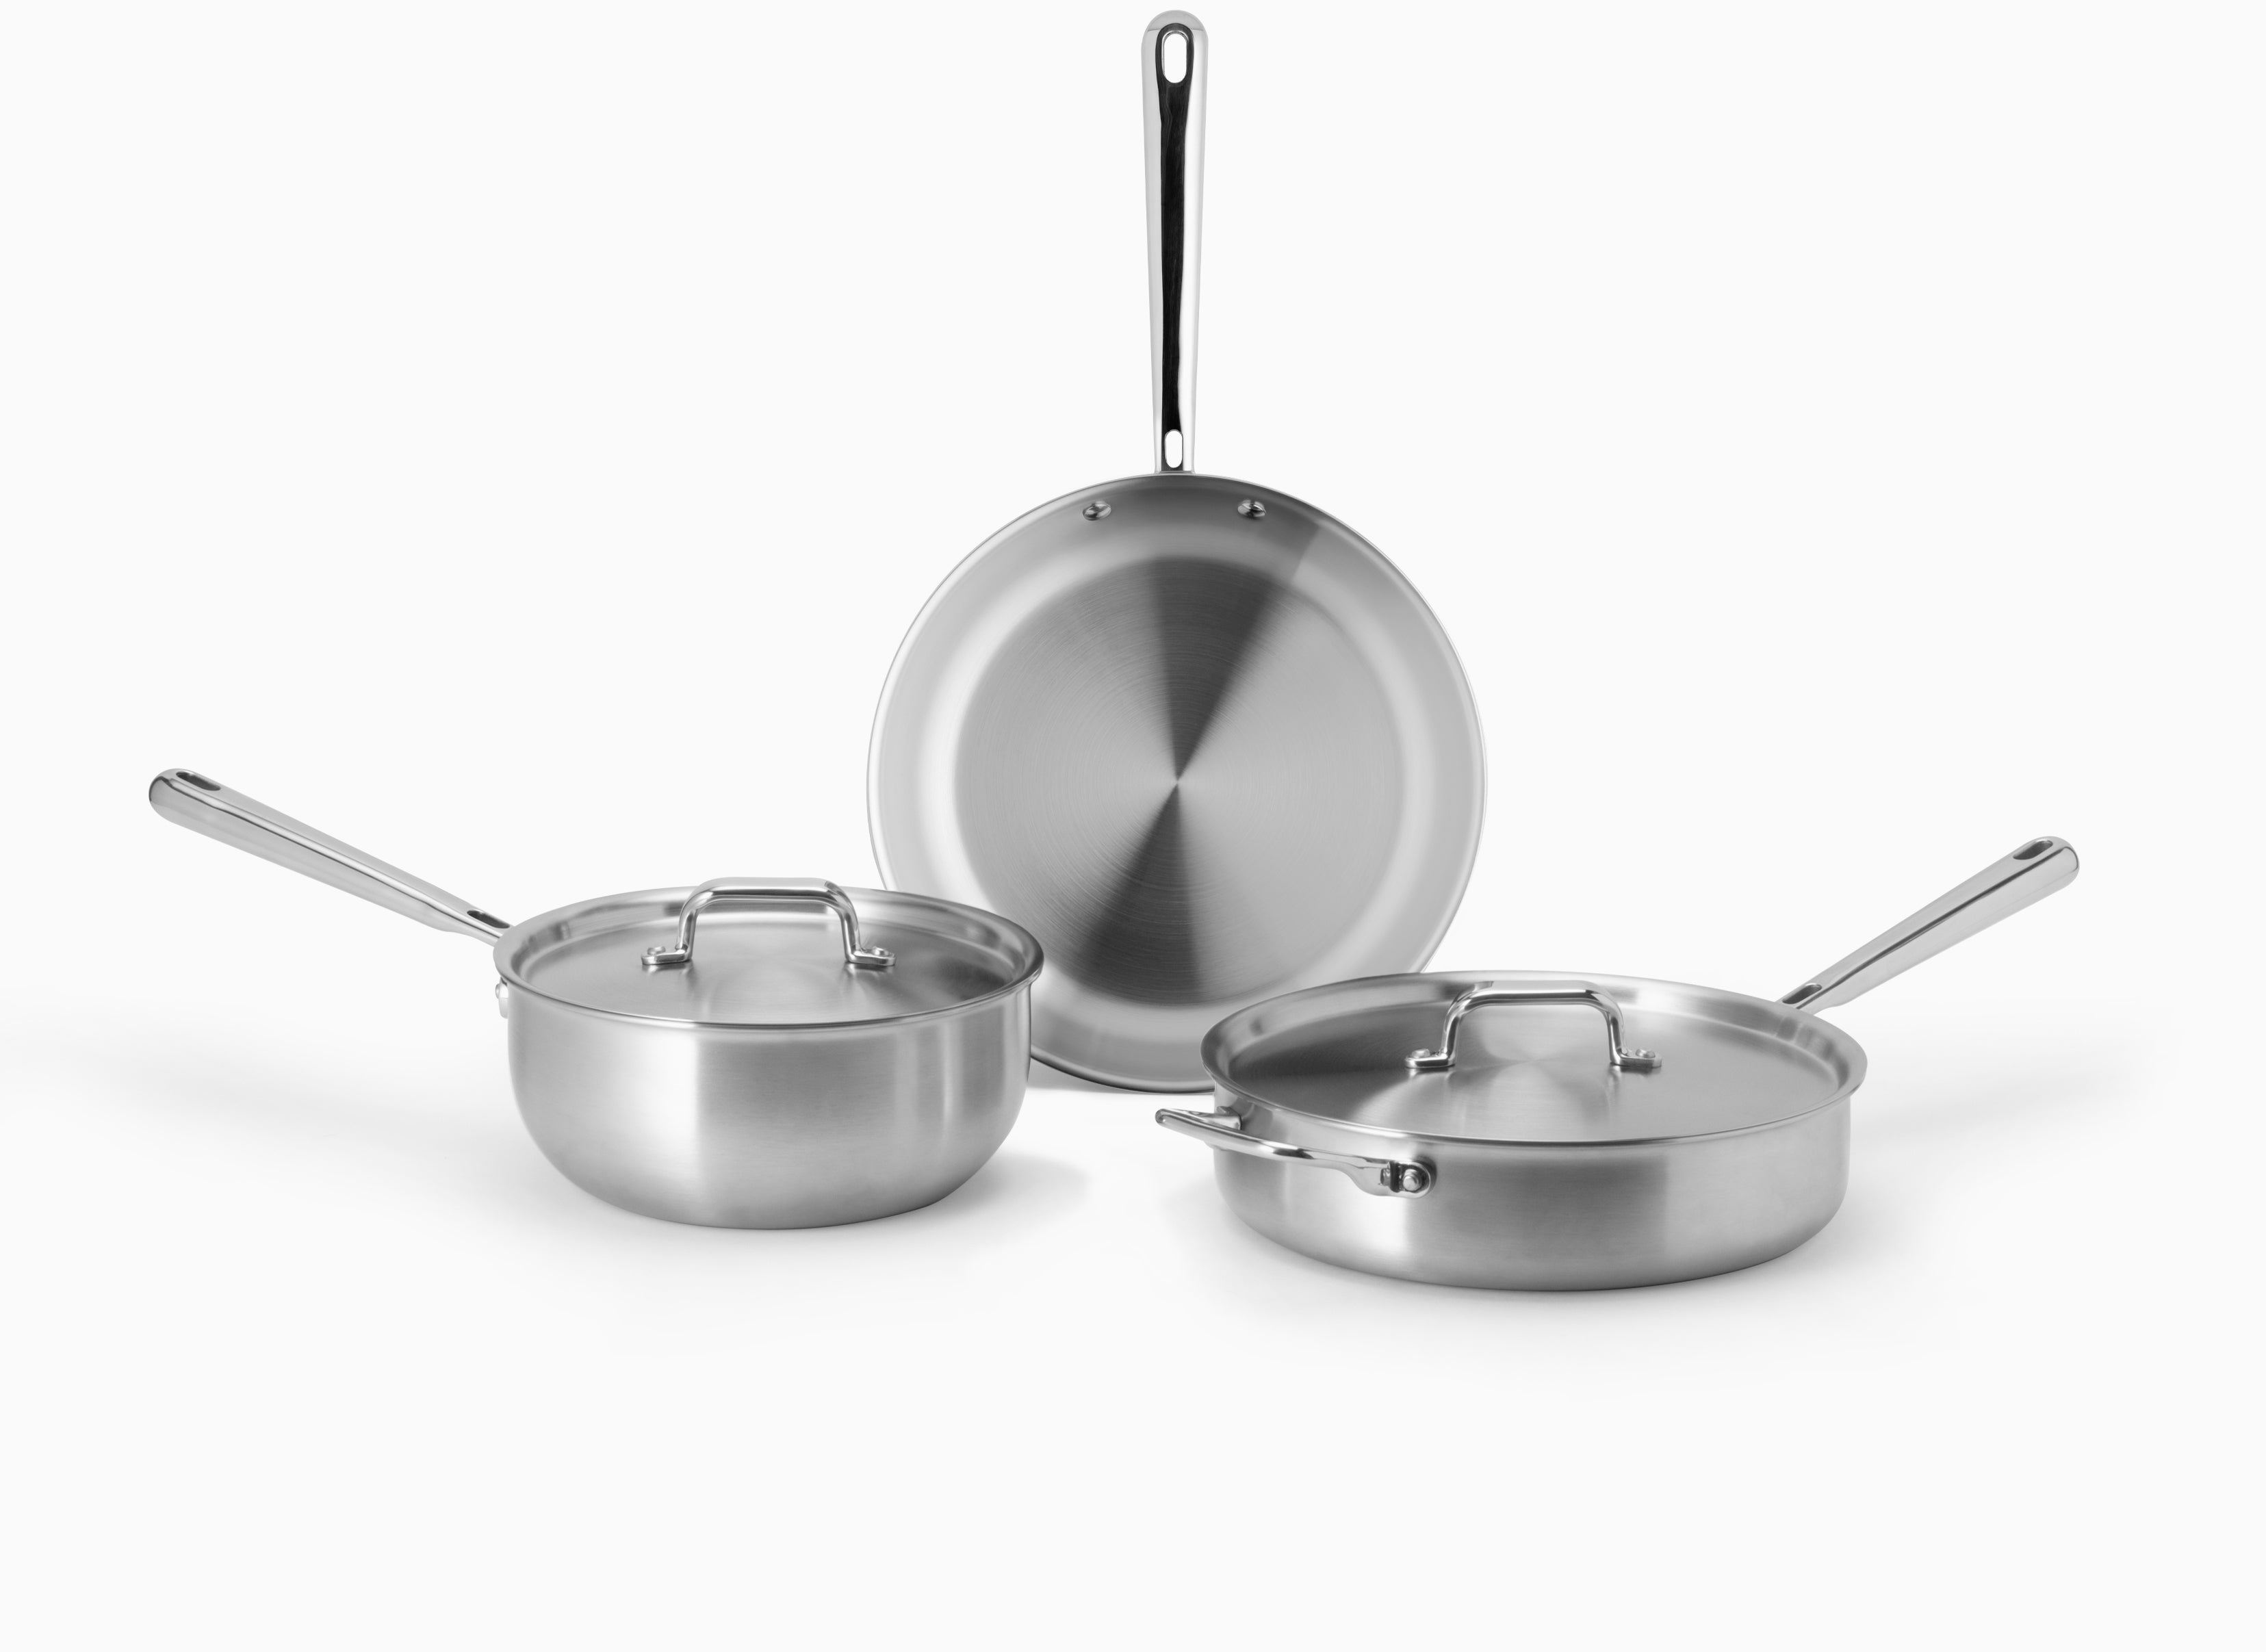 Misen | 2022 Best Stainless Cookware Set | 5 PC | Stainless-Steel